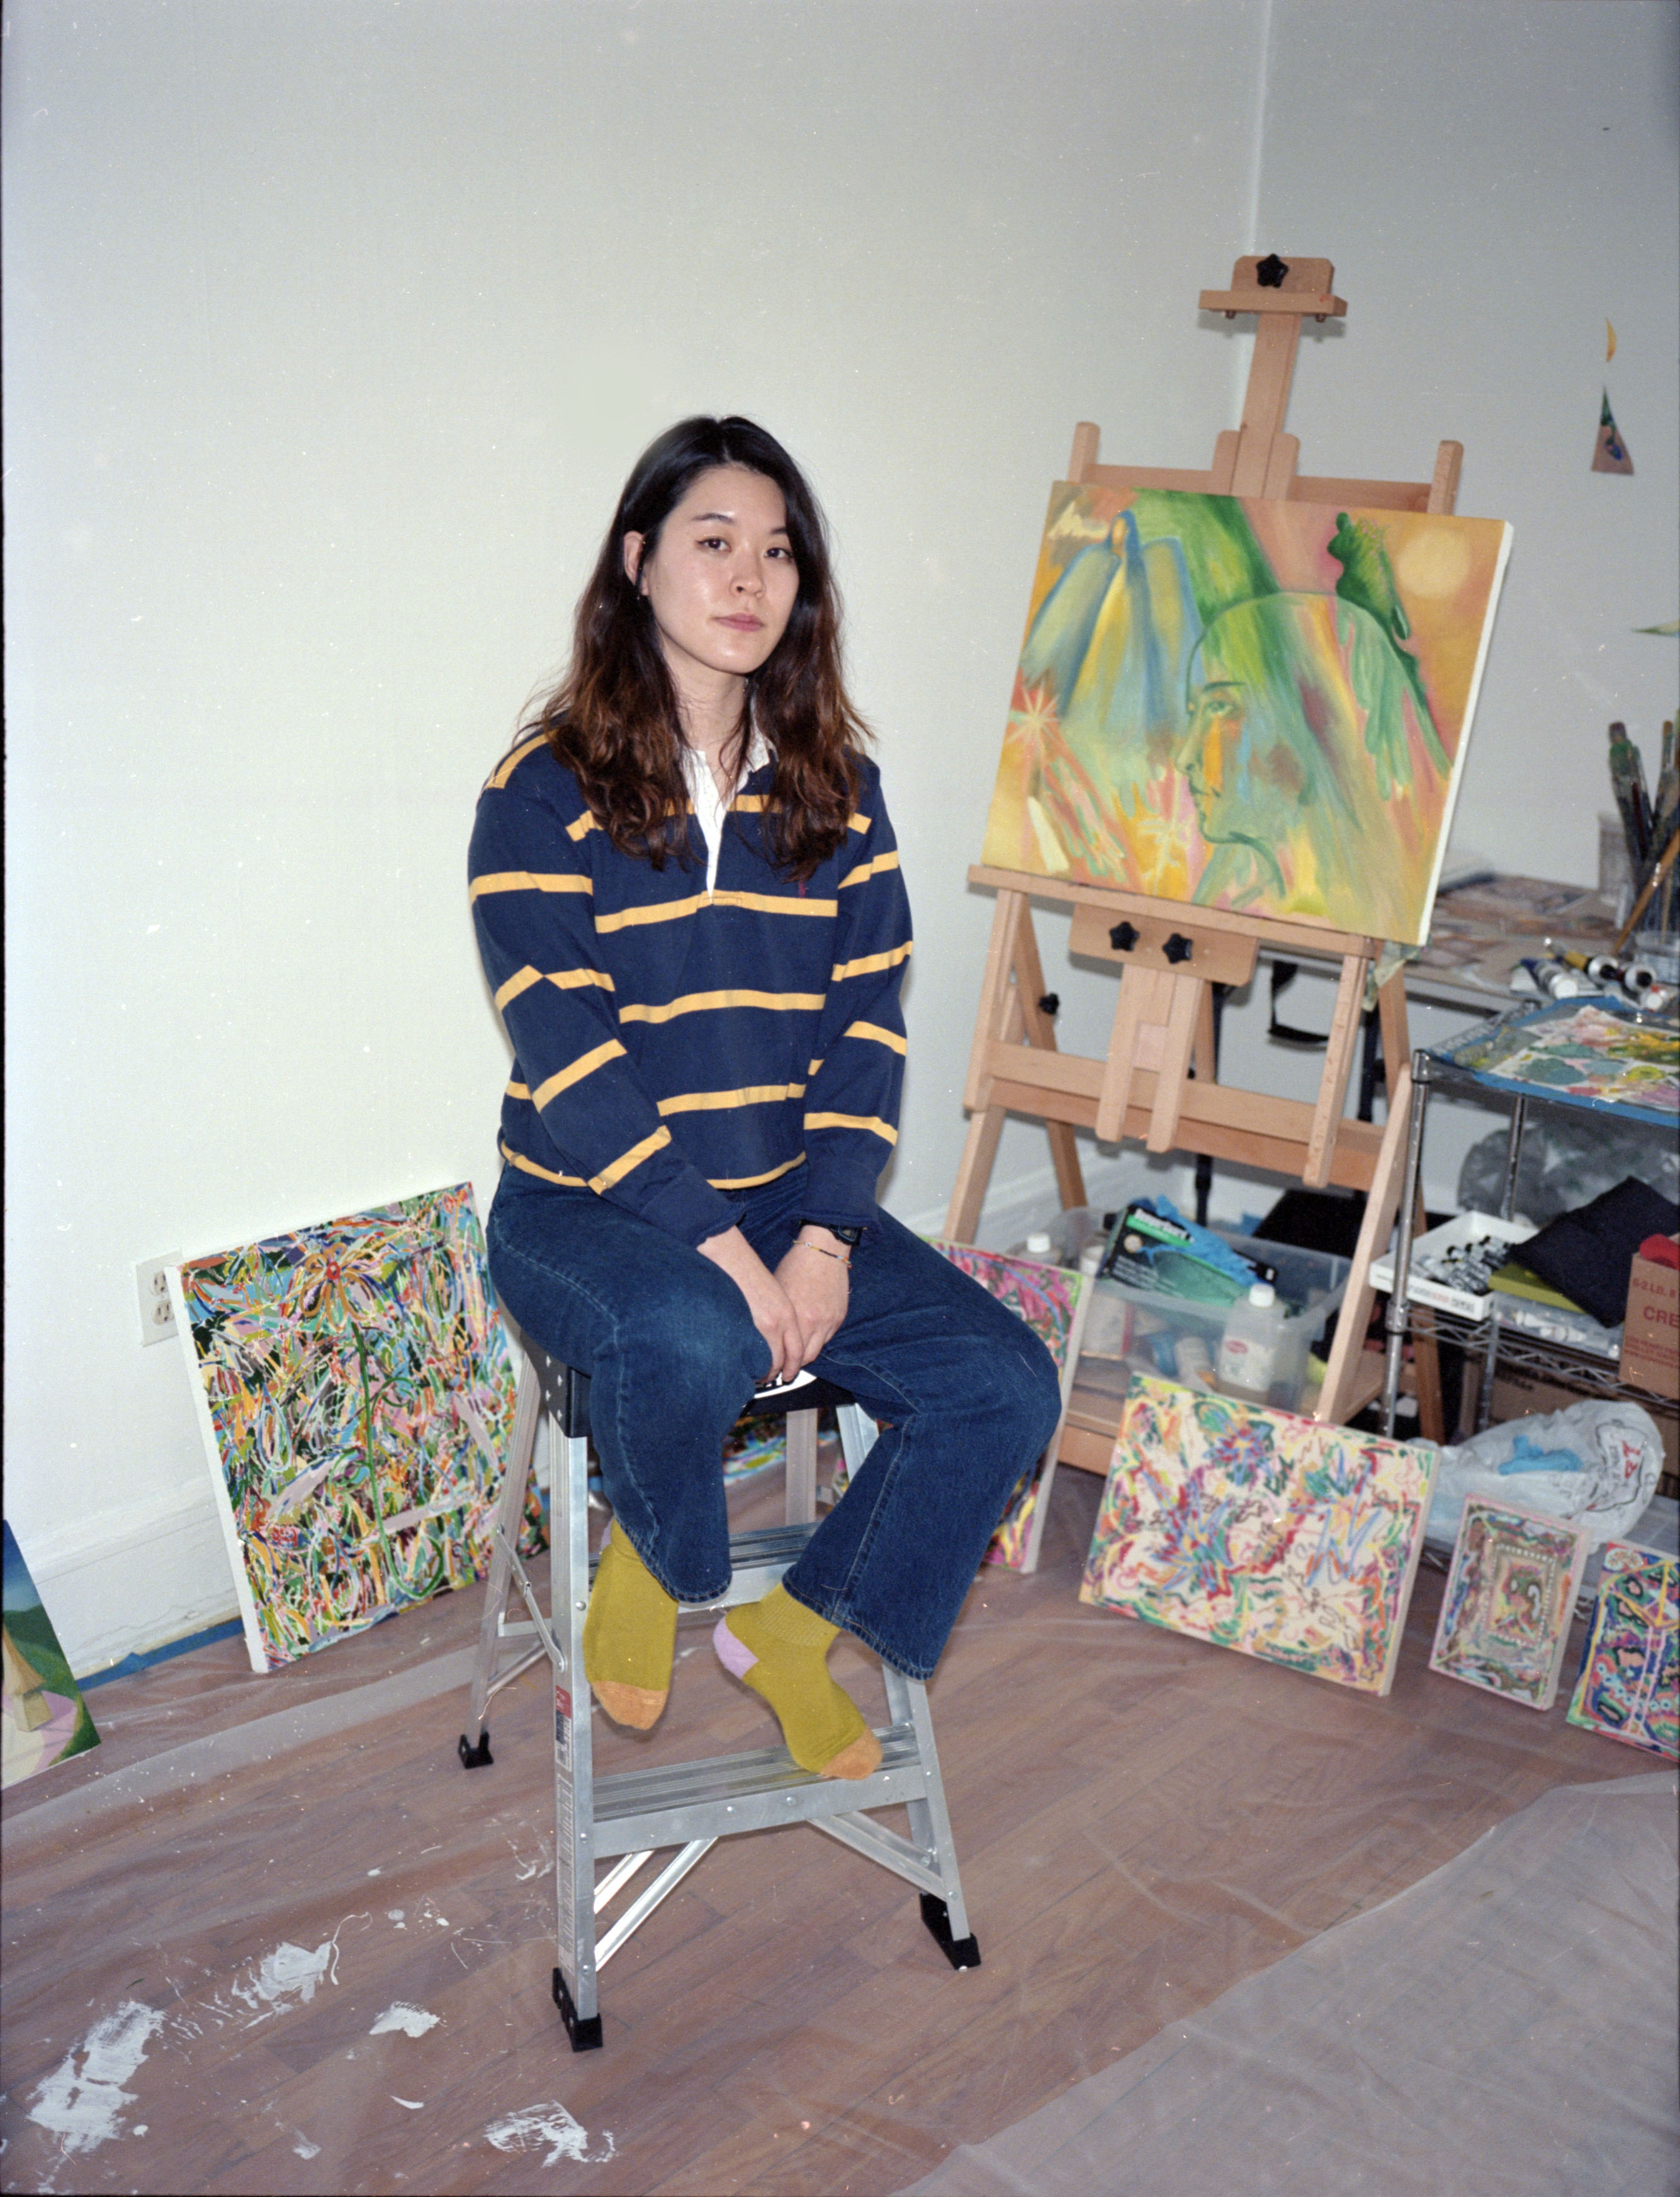 Michelle Chun sits on the top step of a three step ladder in front of a collection of in-progress paintings. She is wearing a striped shirt, jeans, and yellow socks.